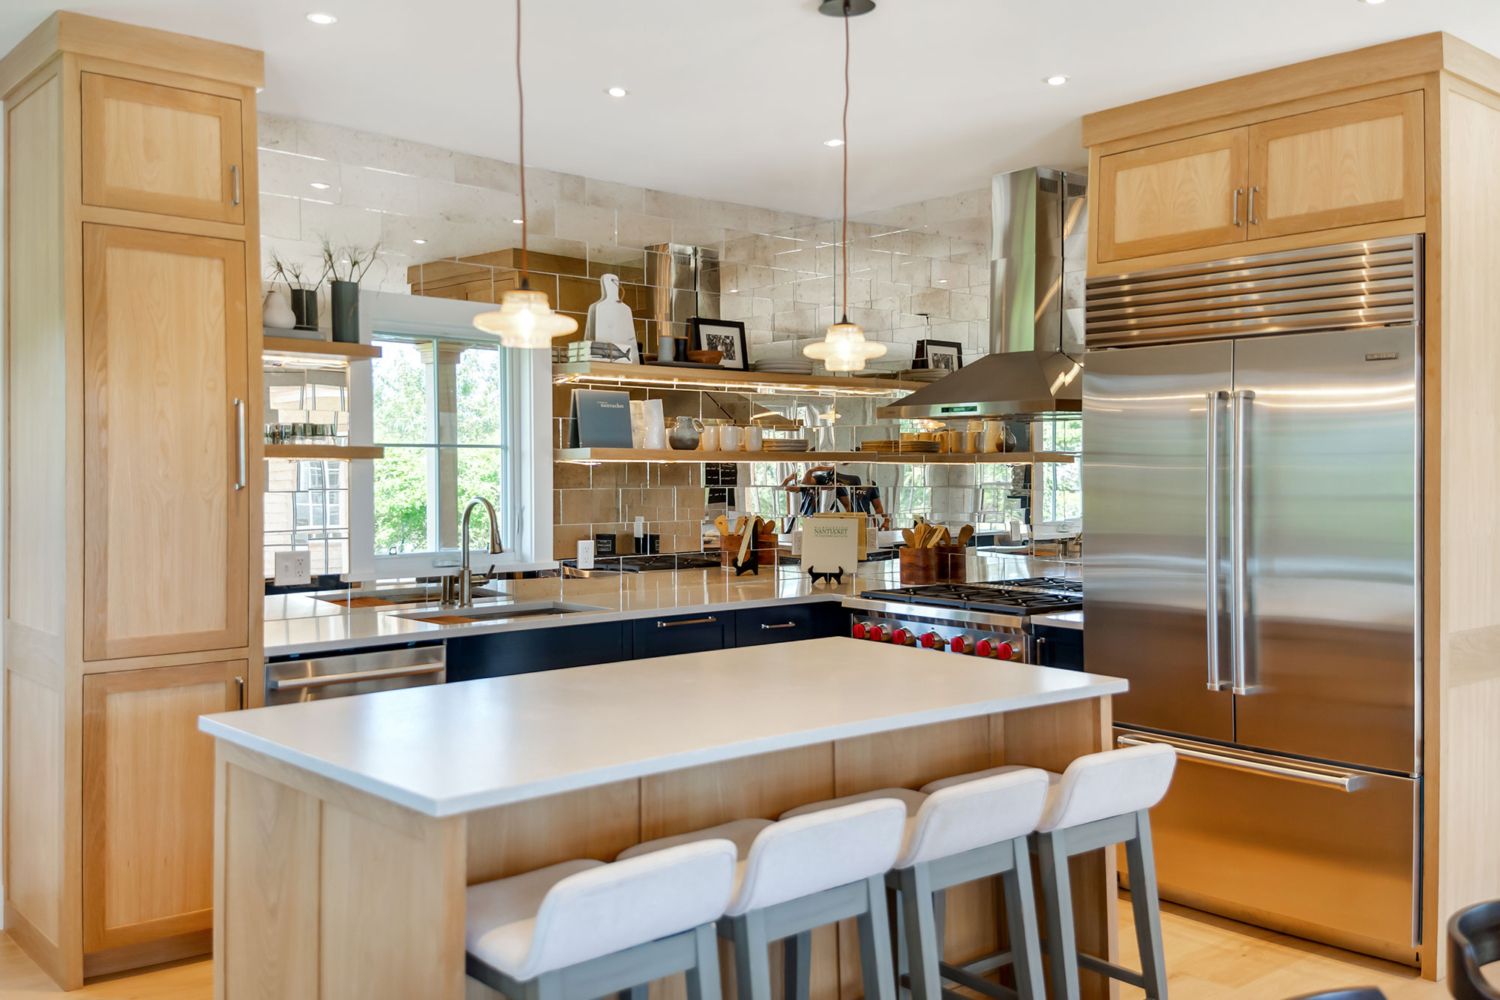 Nantucket Kitchens Built by Carey Company